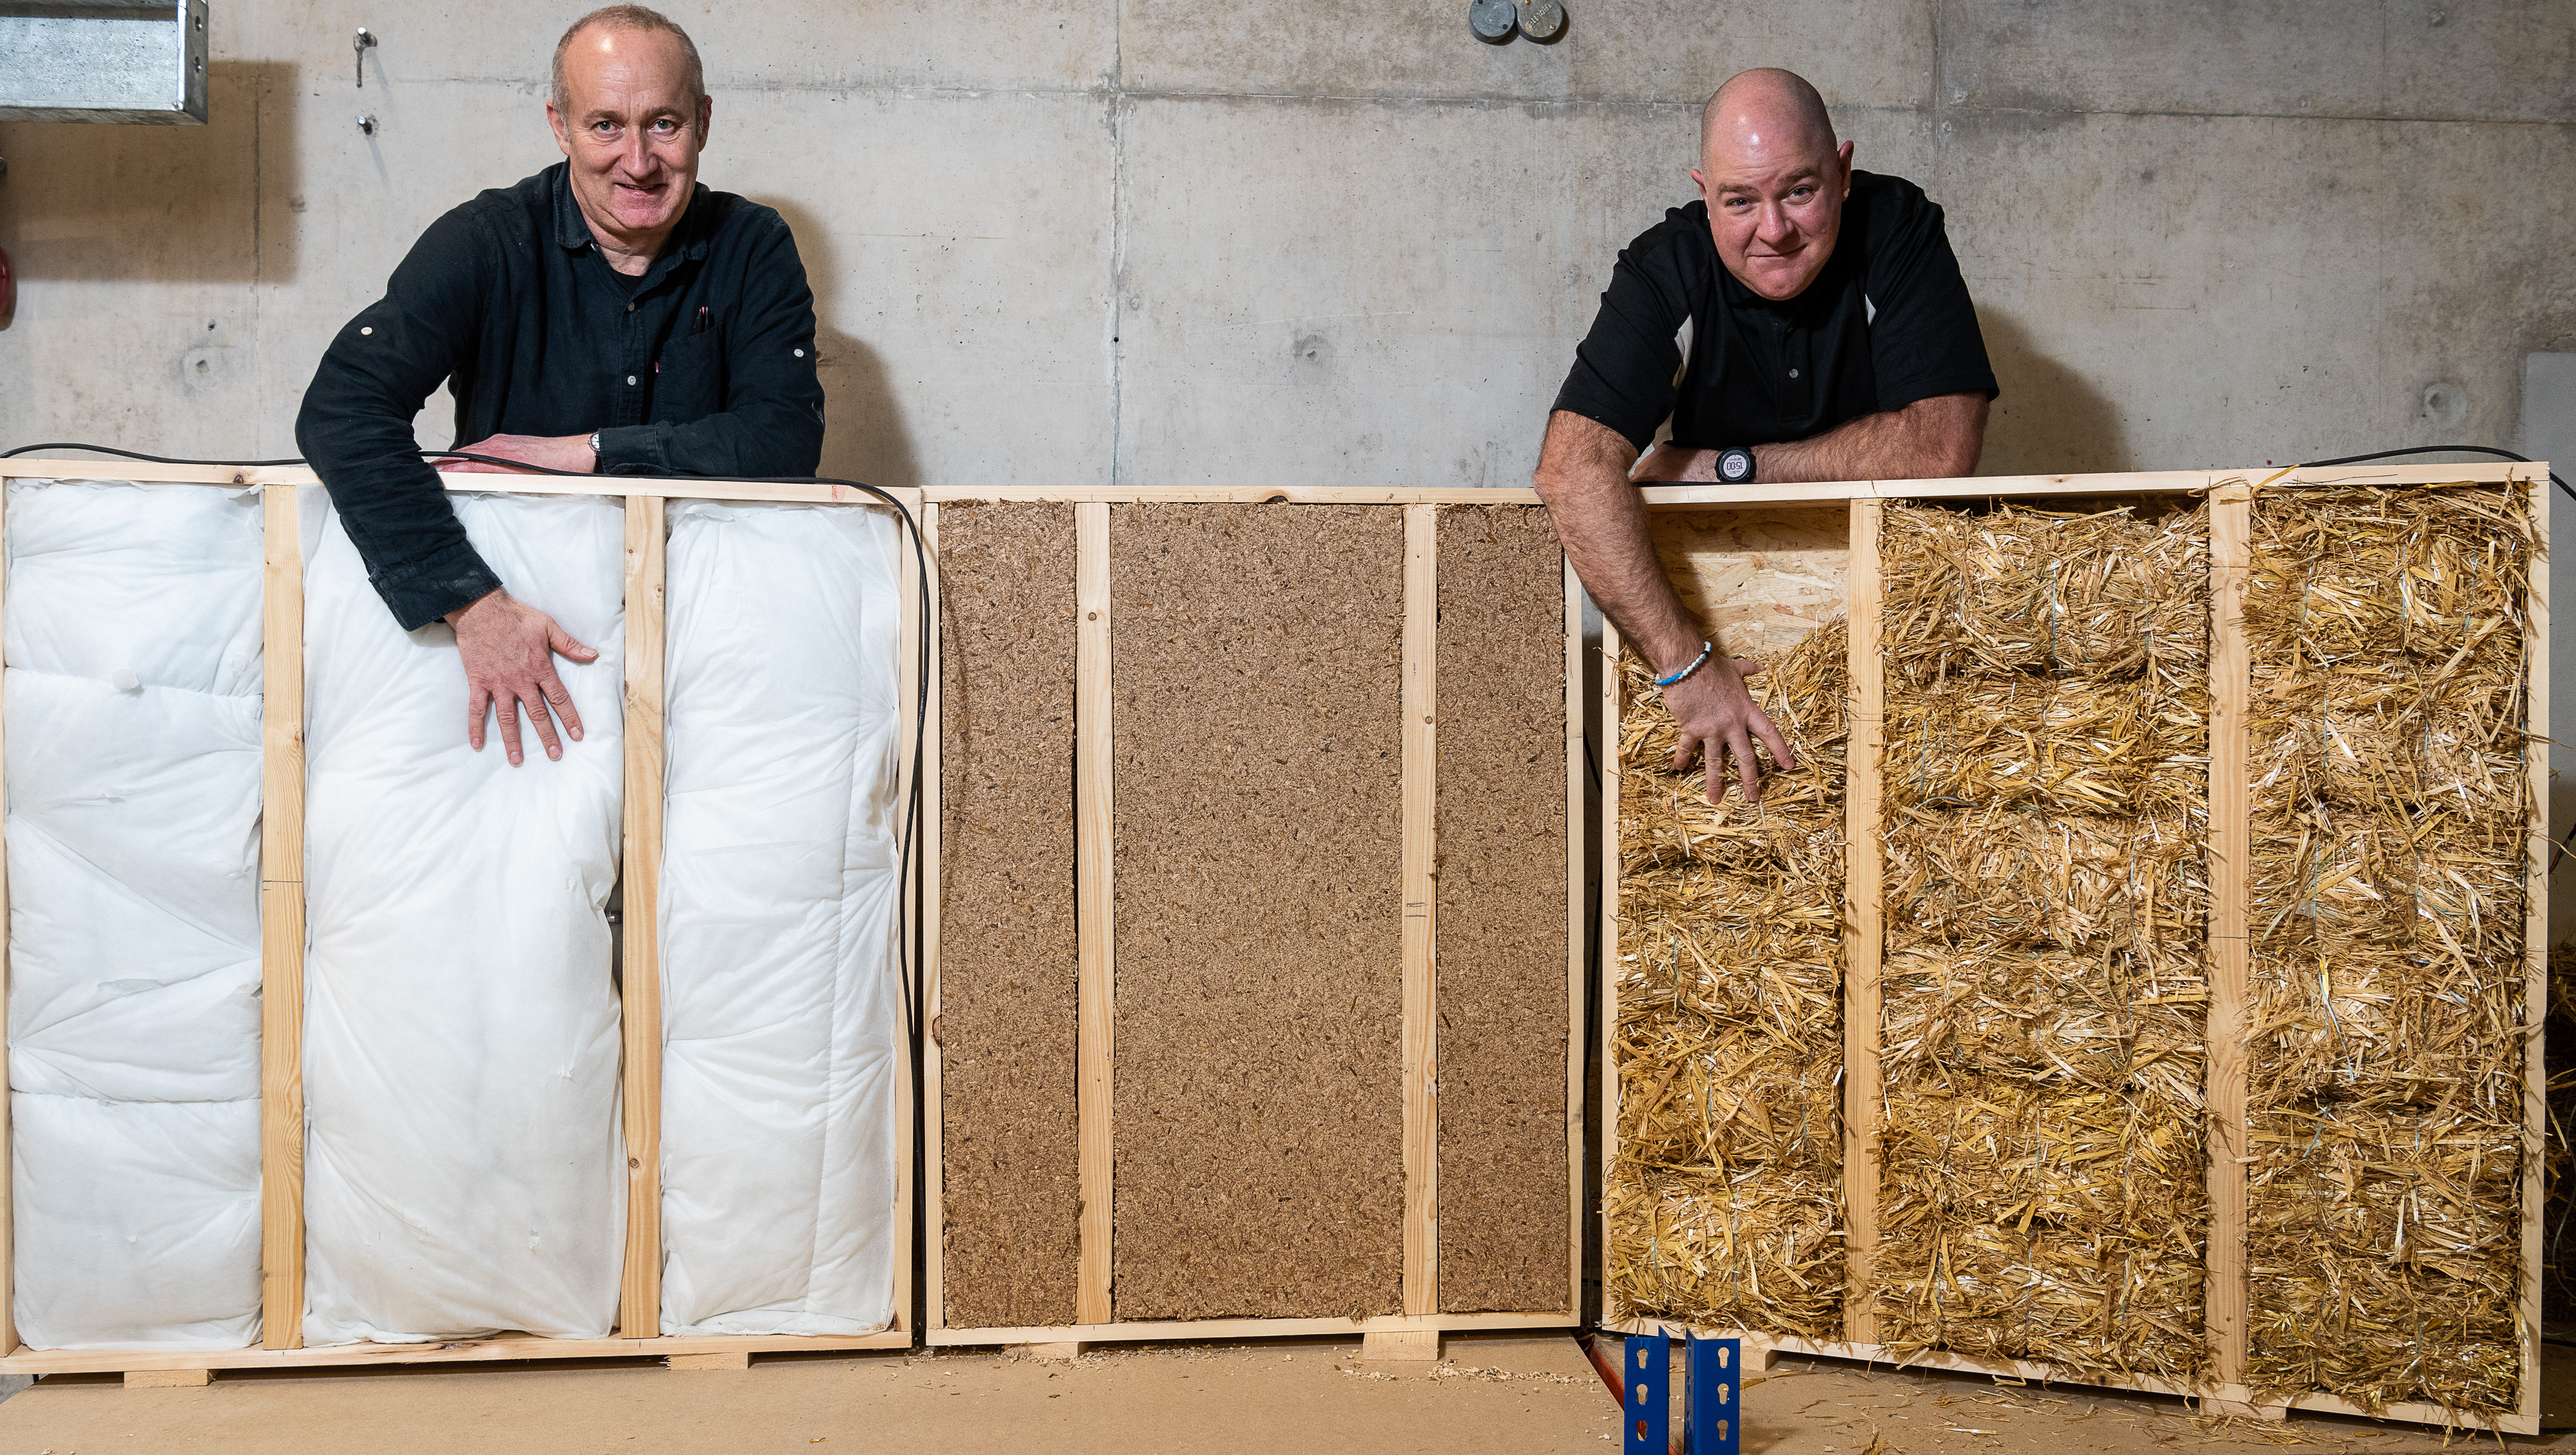 Professor Pete Walker (left) and Dr Shawn Platt 9right) from the University are Bath are testing a number of waste materials to assess their thermal performance as potential materials for insulating buildings.